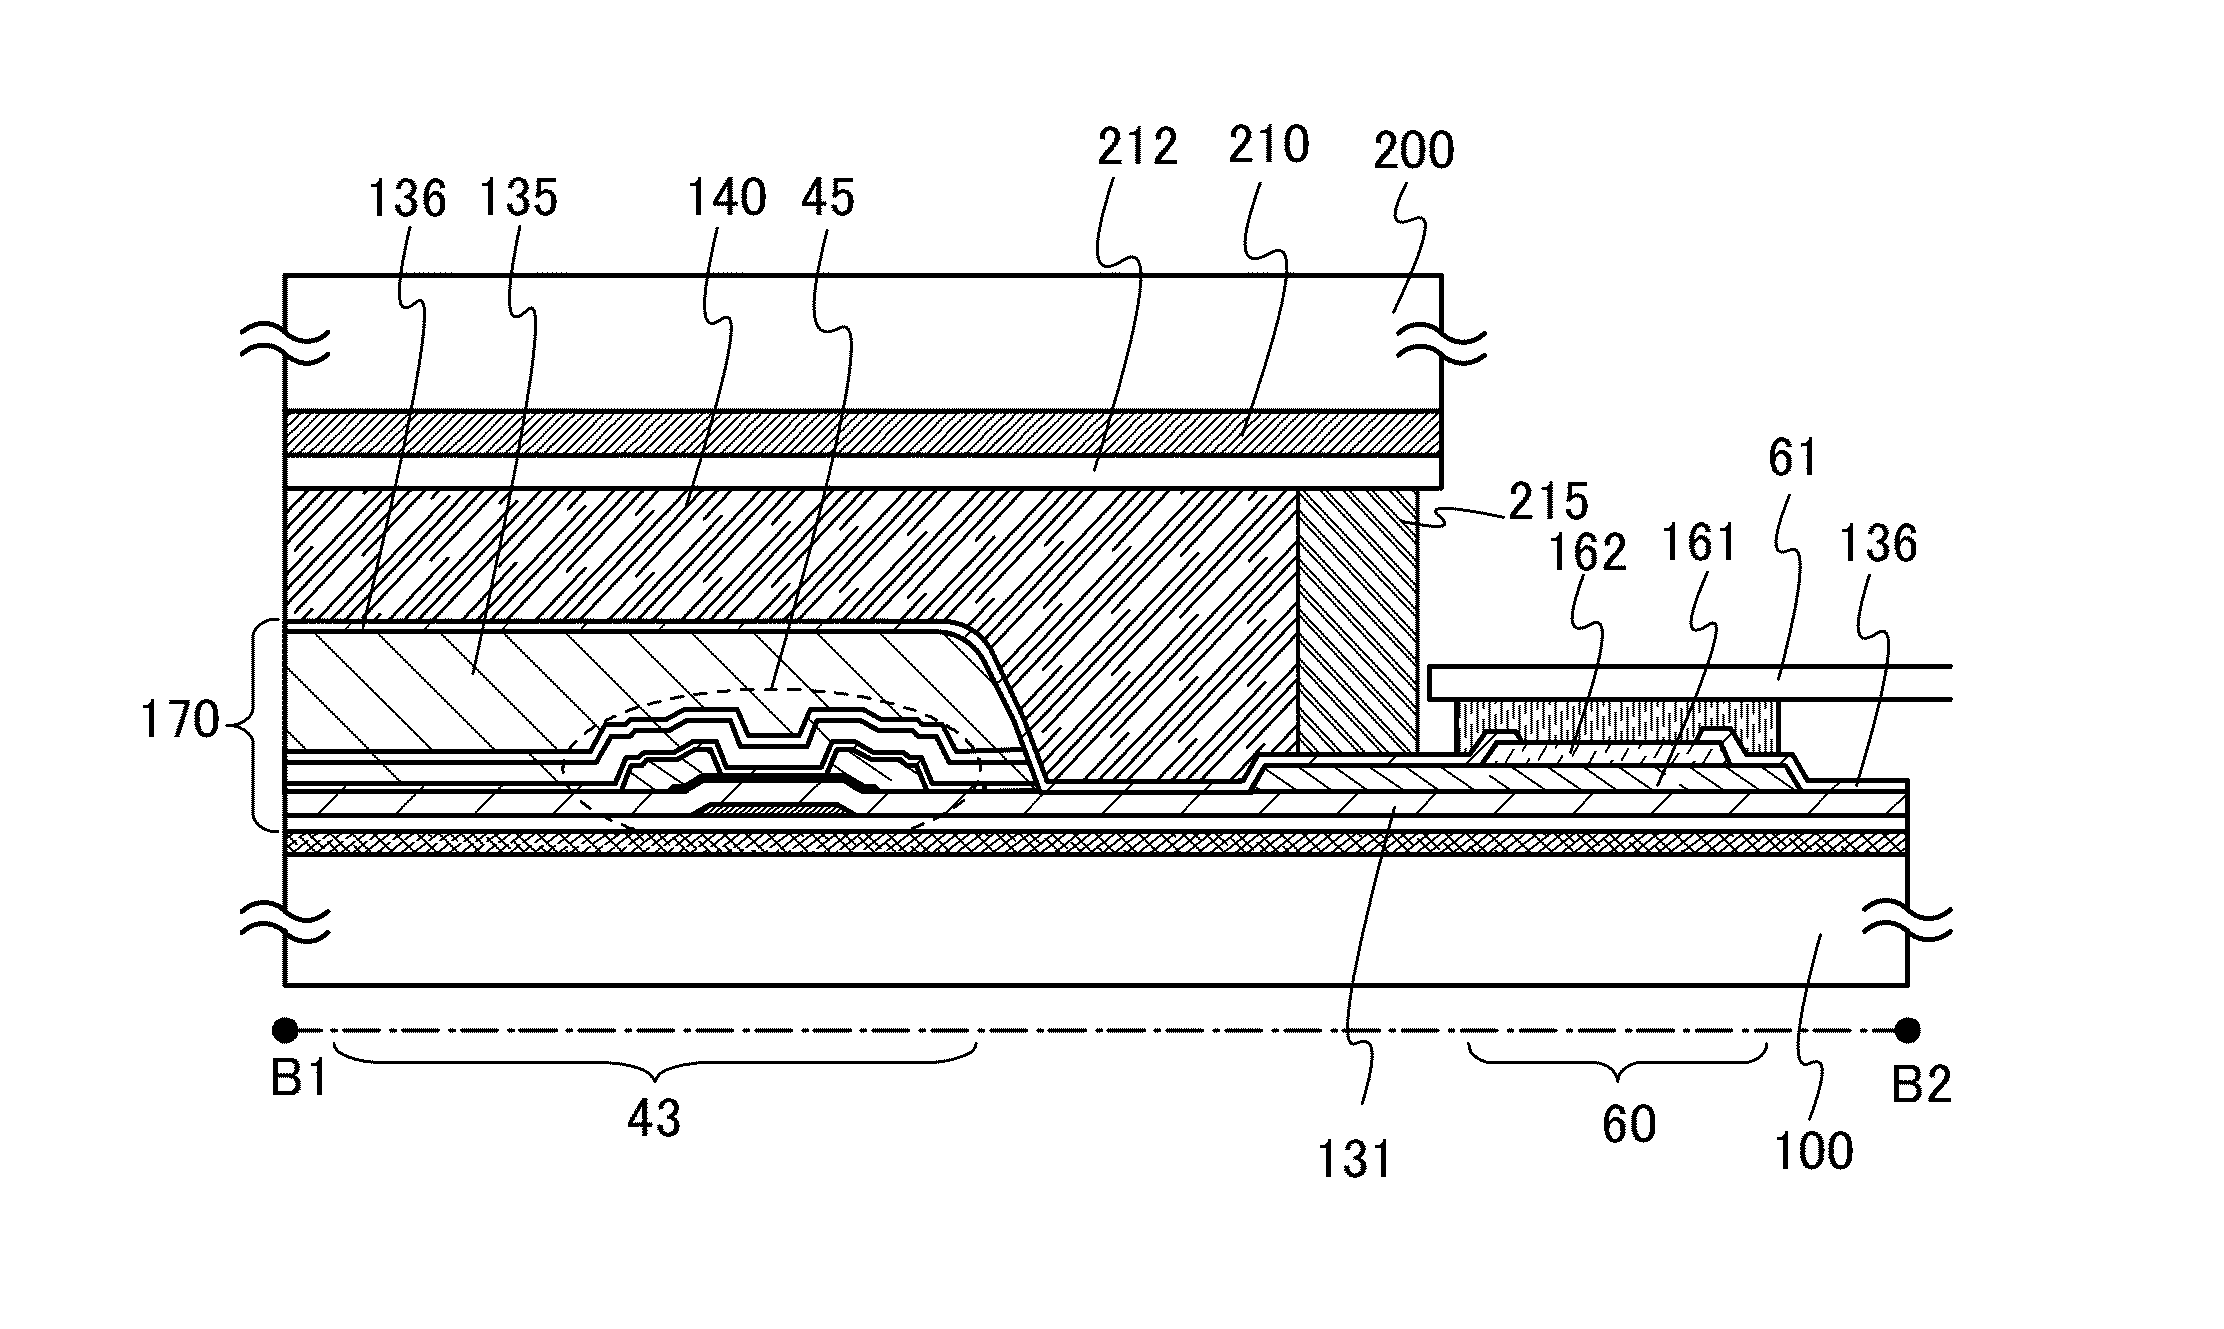 Liquid crystal display device and touch panel